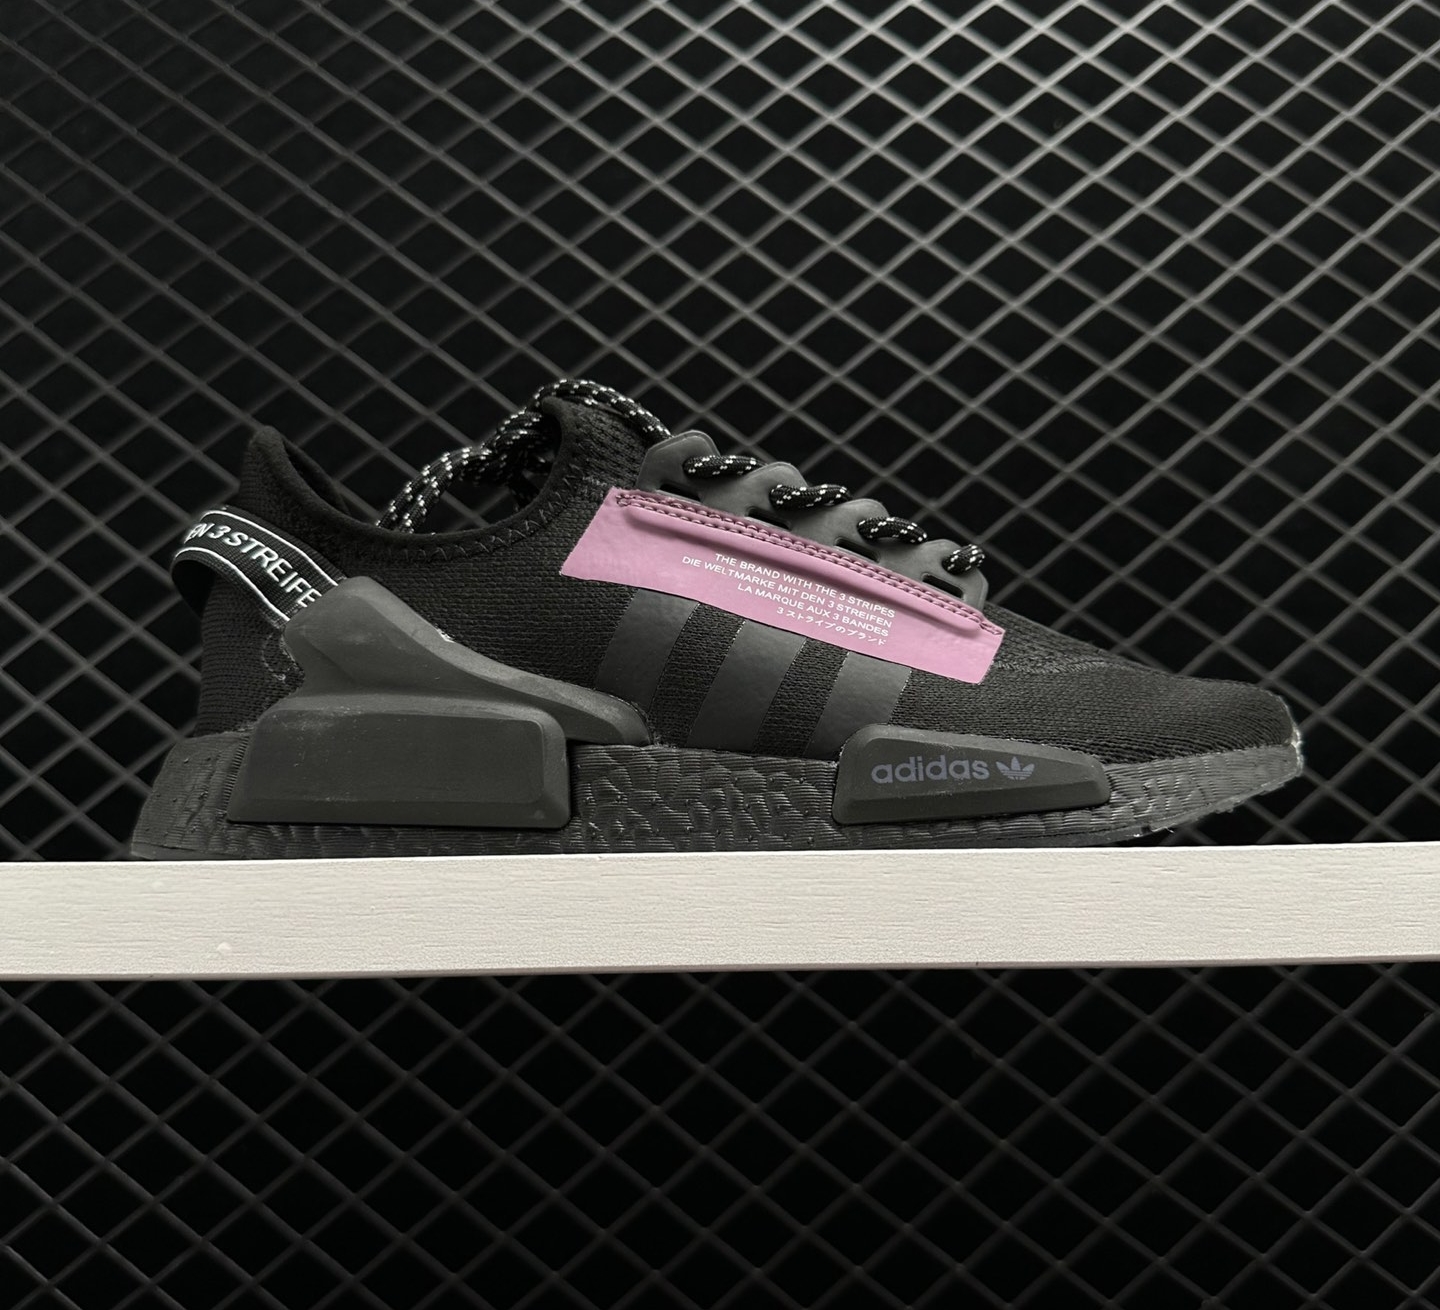 Adidas NMD R1 V2 Black Pink - Stylish and Comfortable Sneakers